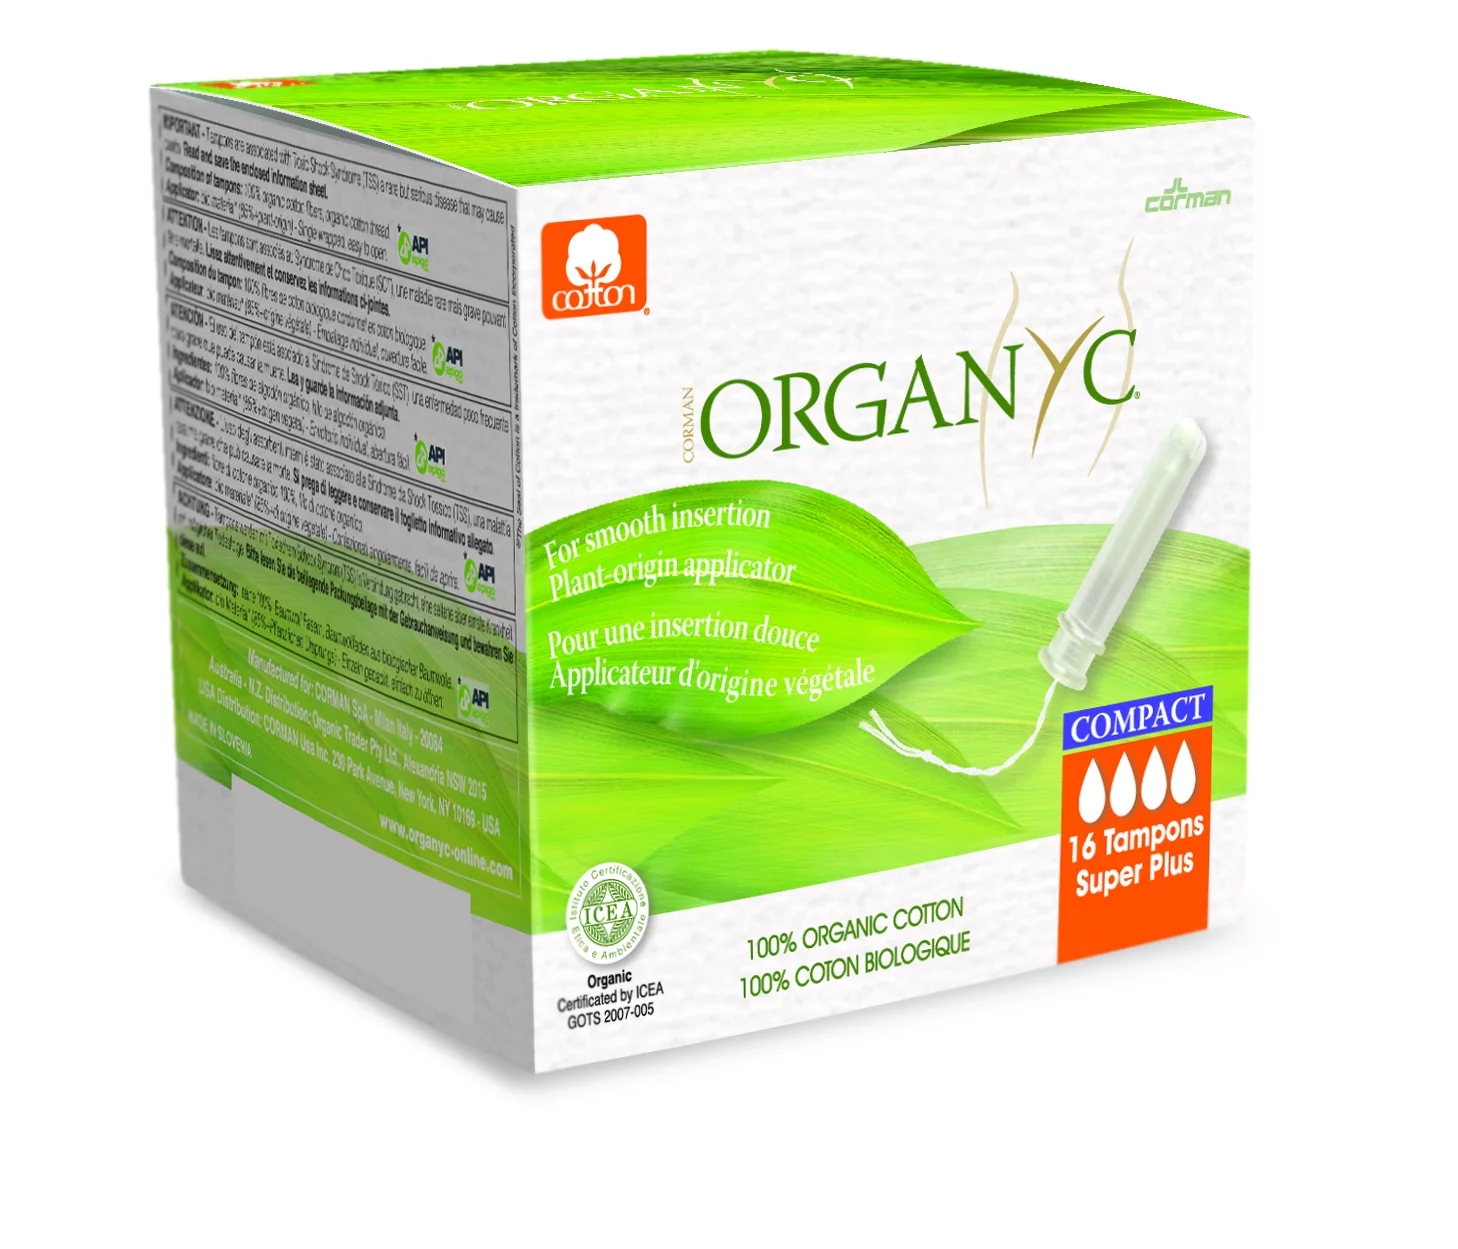 Organyc 100% Certified Organic Cotton Tampons with Organic-Based Compact Applicator, Super Plus 16 Ct